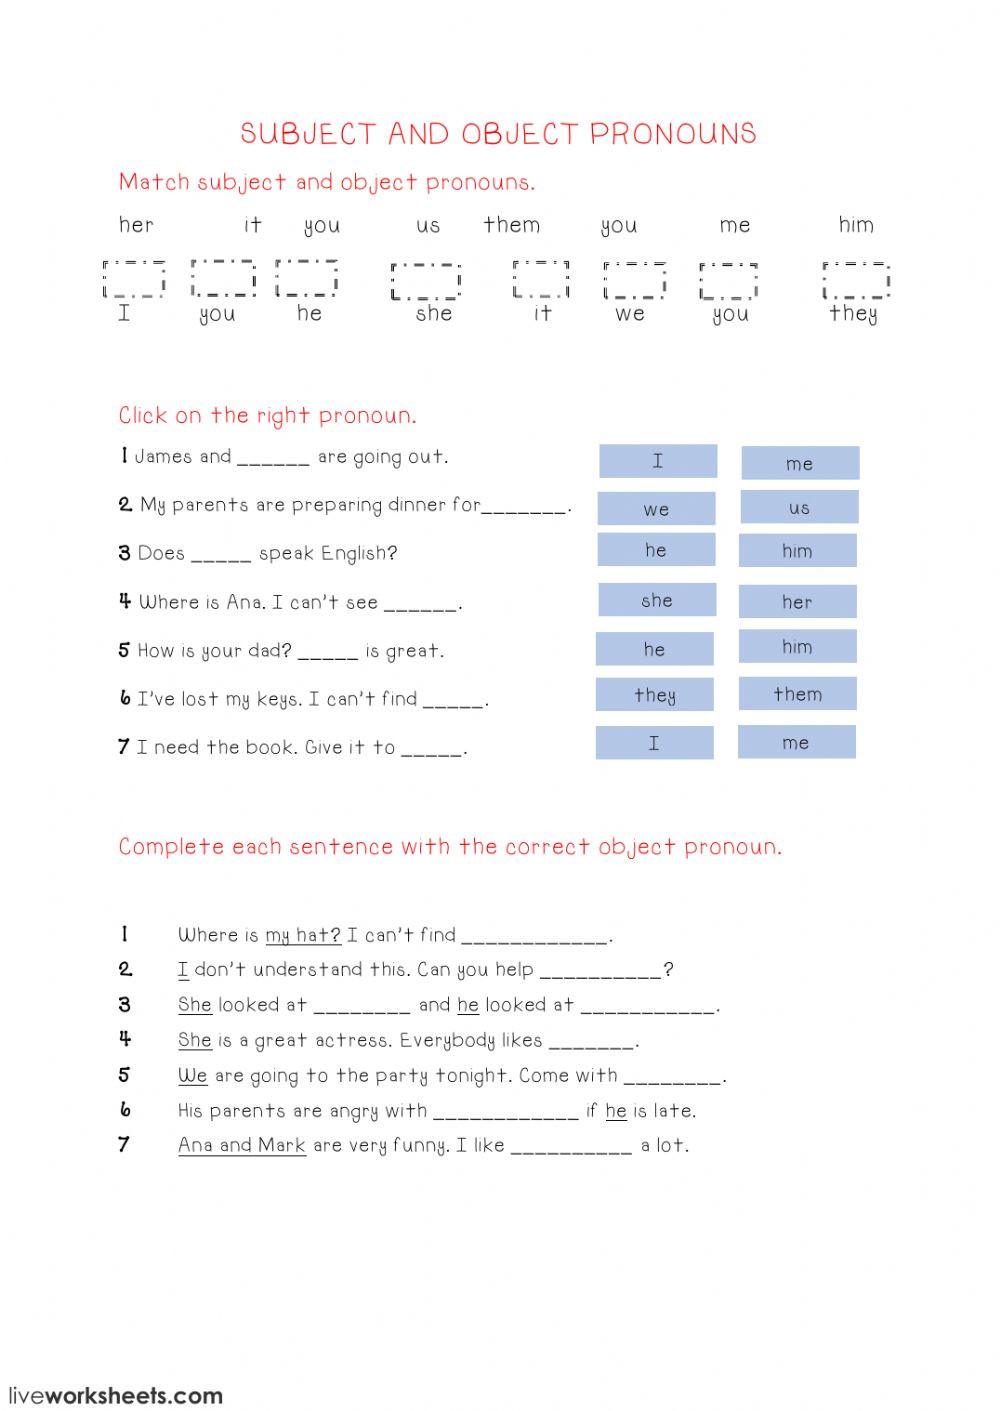 Pronoun Worksheets Second Grade Subject and Object Pronouns Worksheet